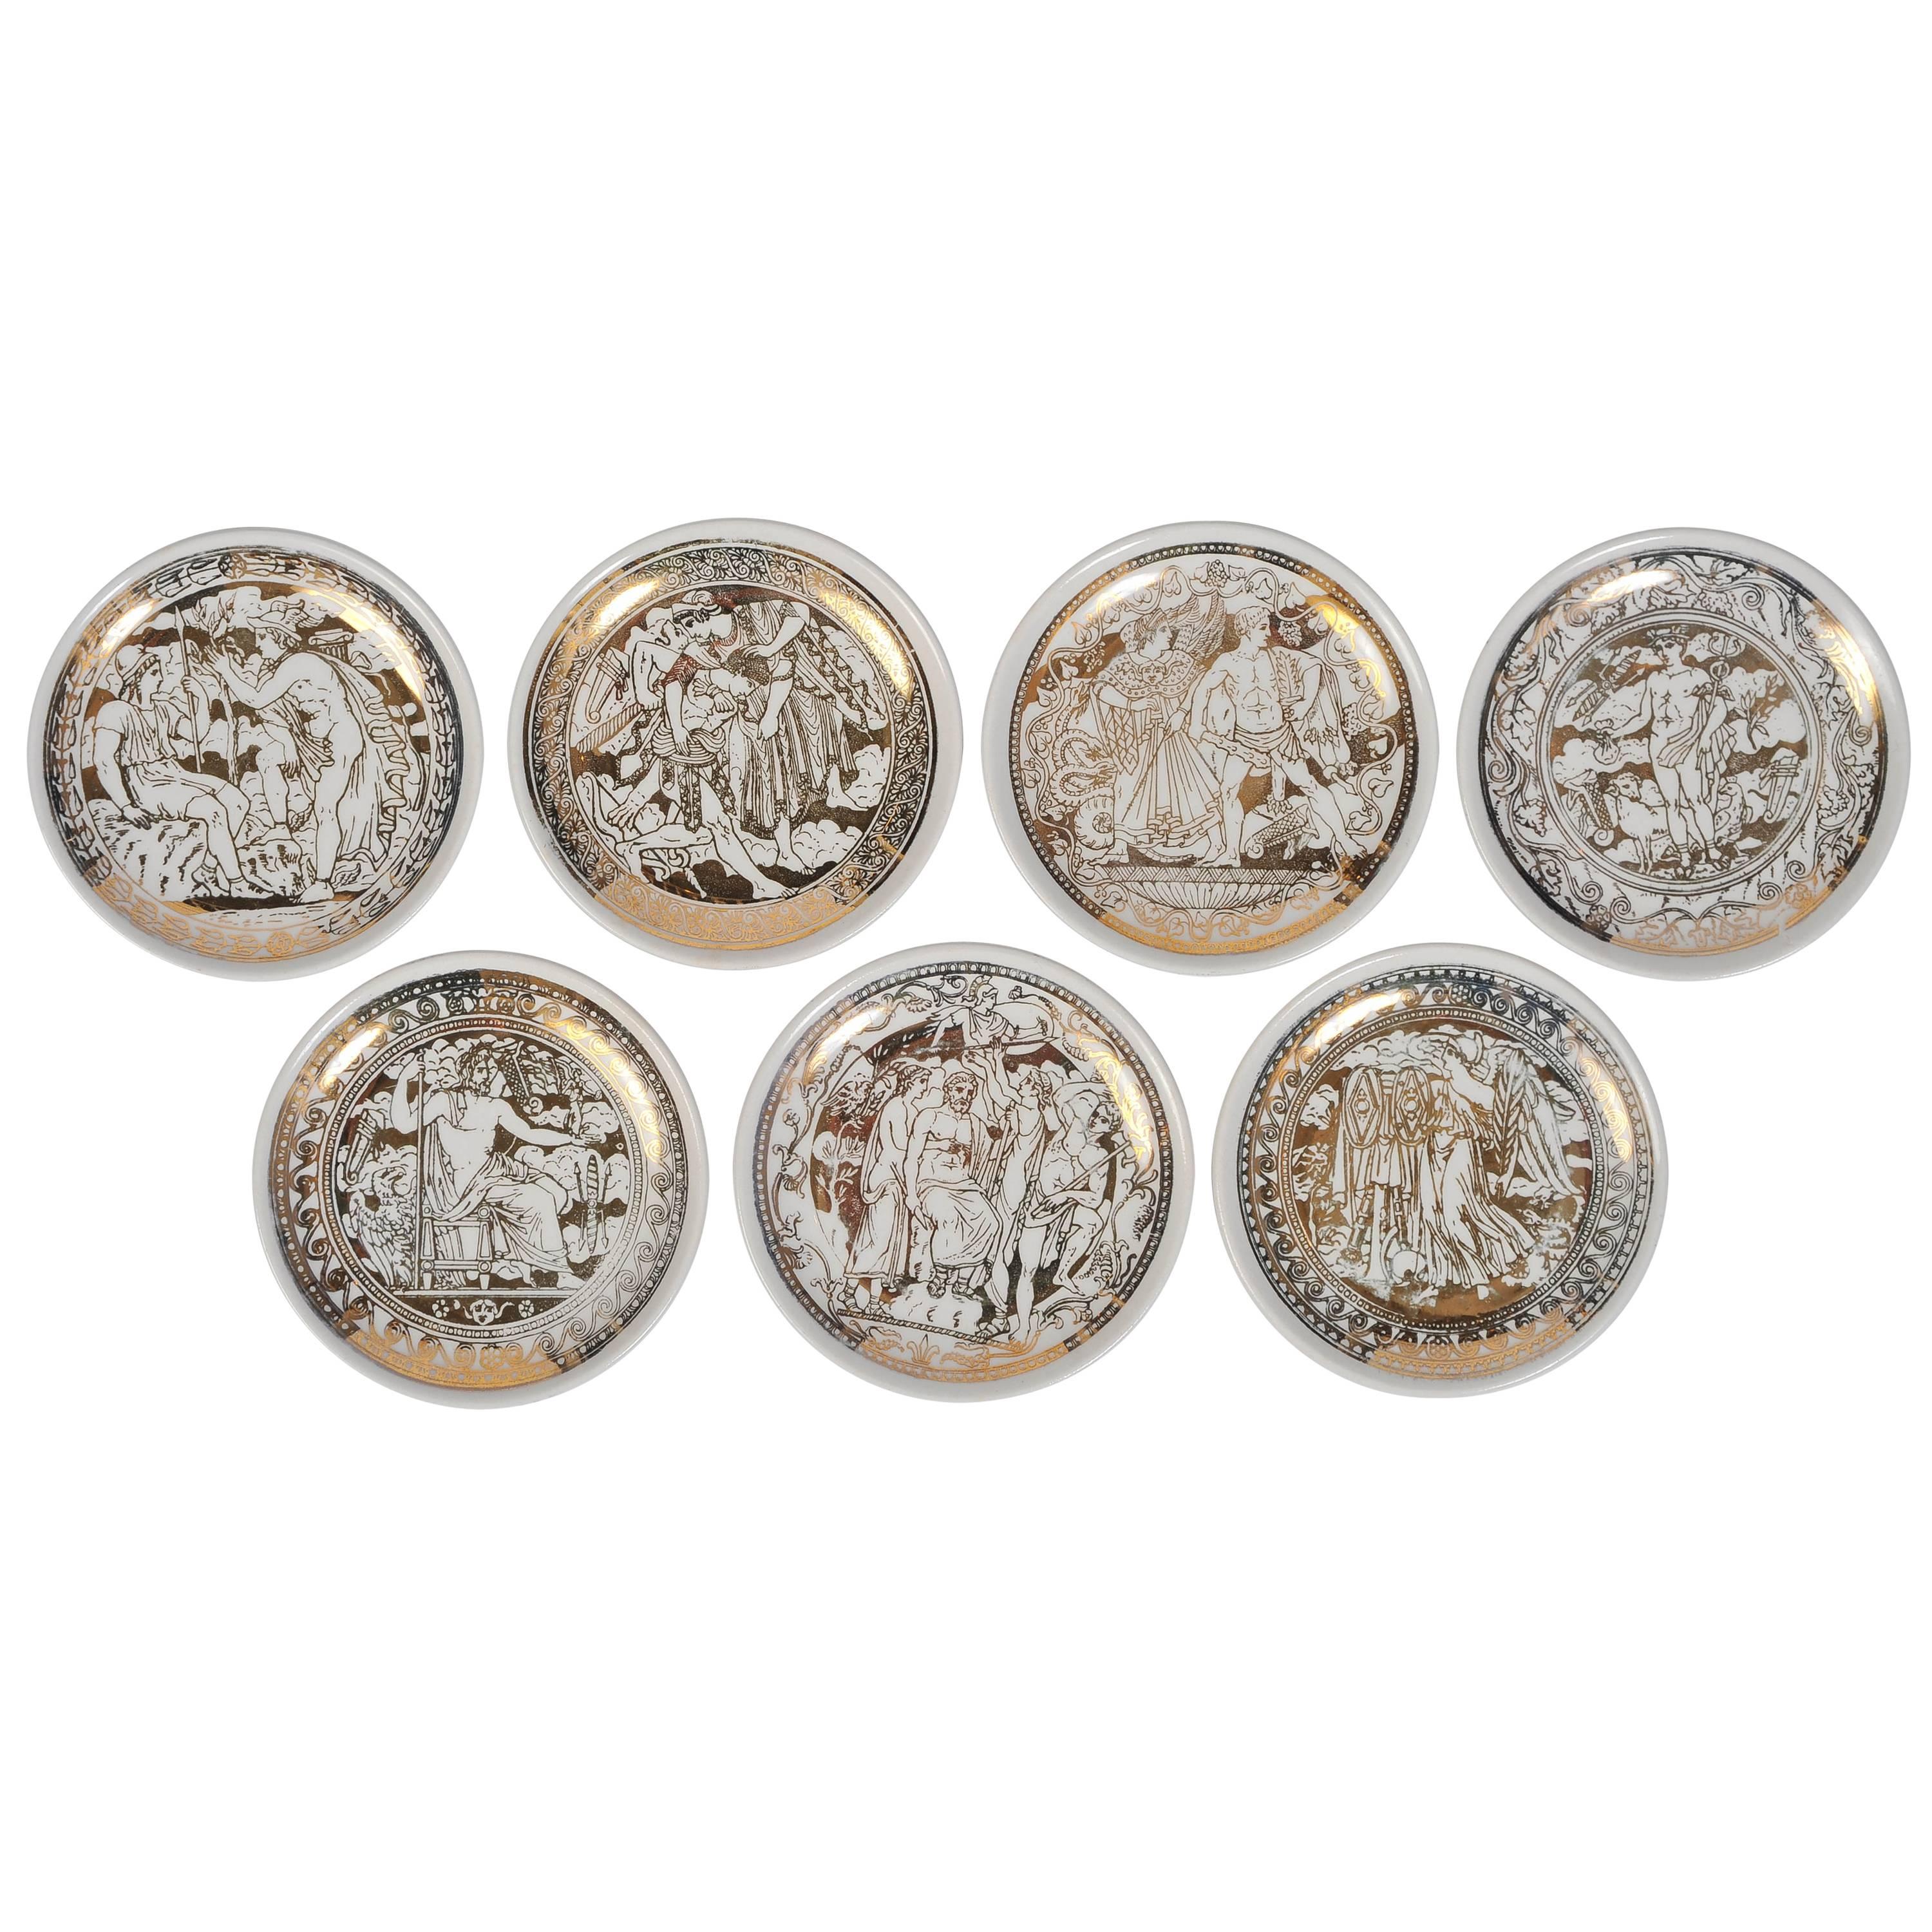 Set of Seven Small Plates by Piero Fornasetti